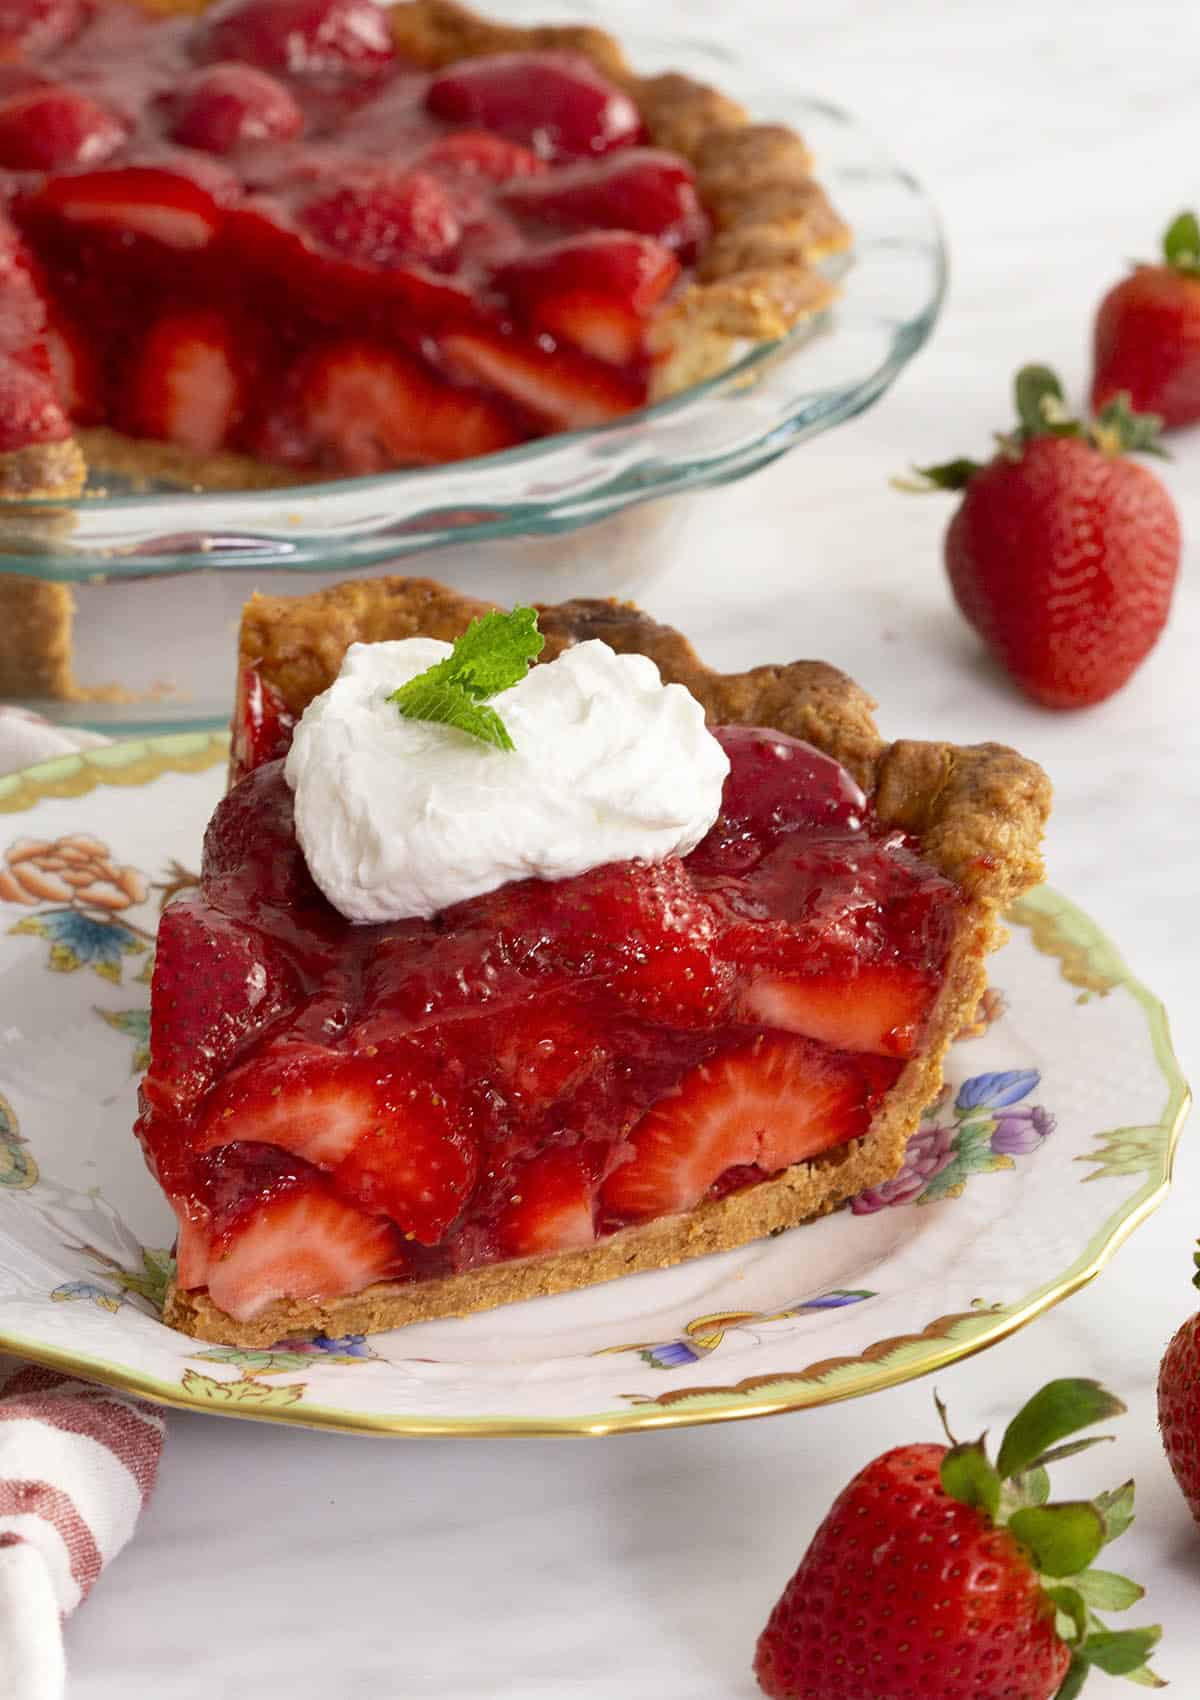 A piece of strawberry pie on a porcelain plate.